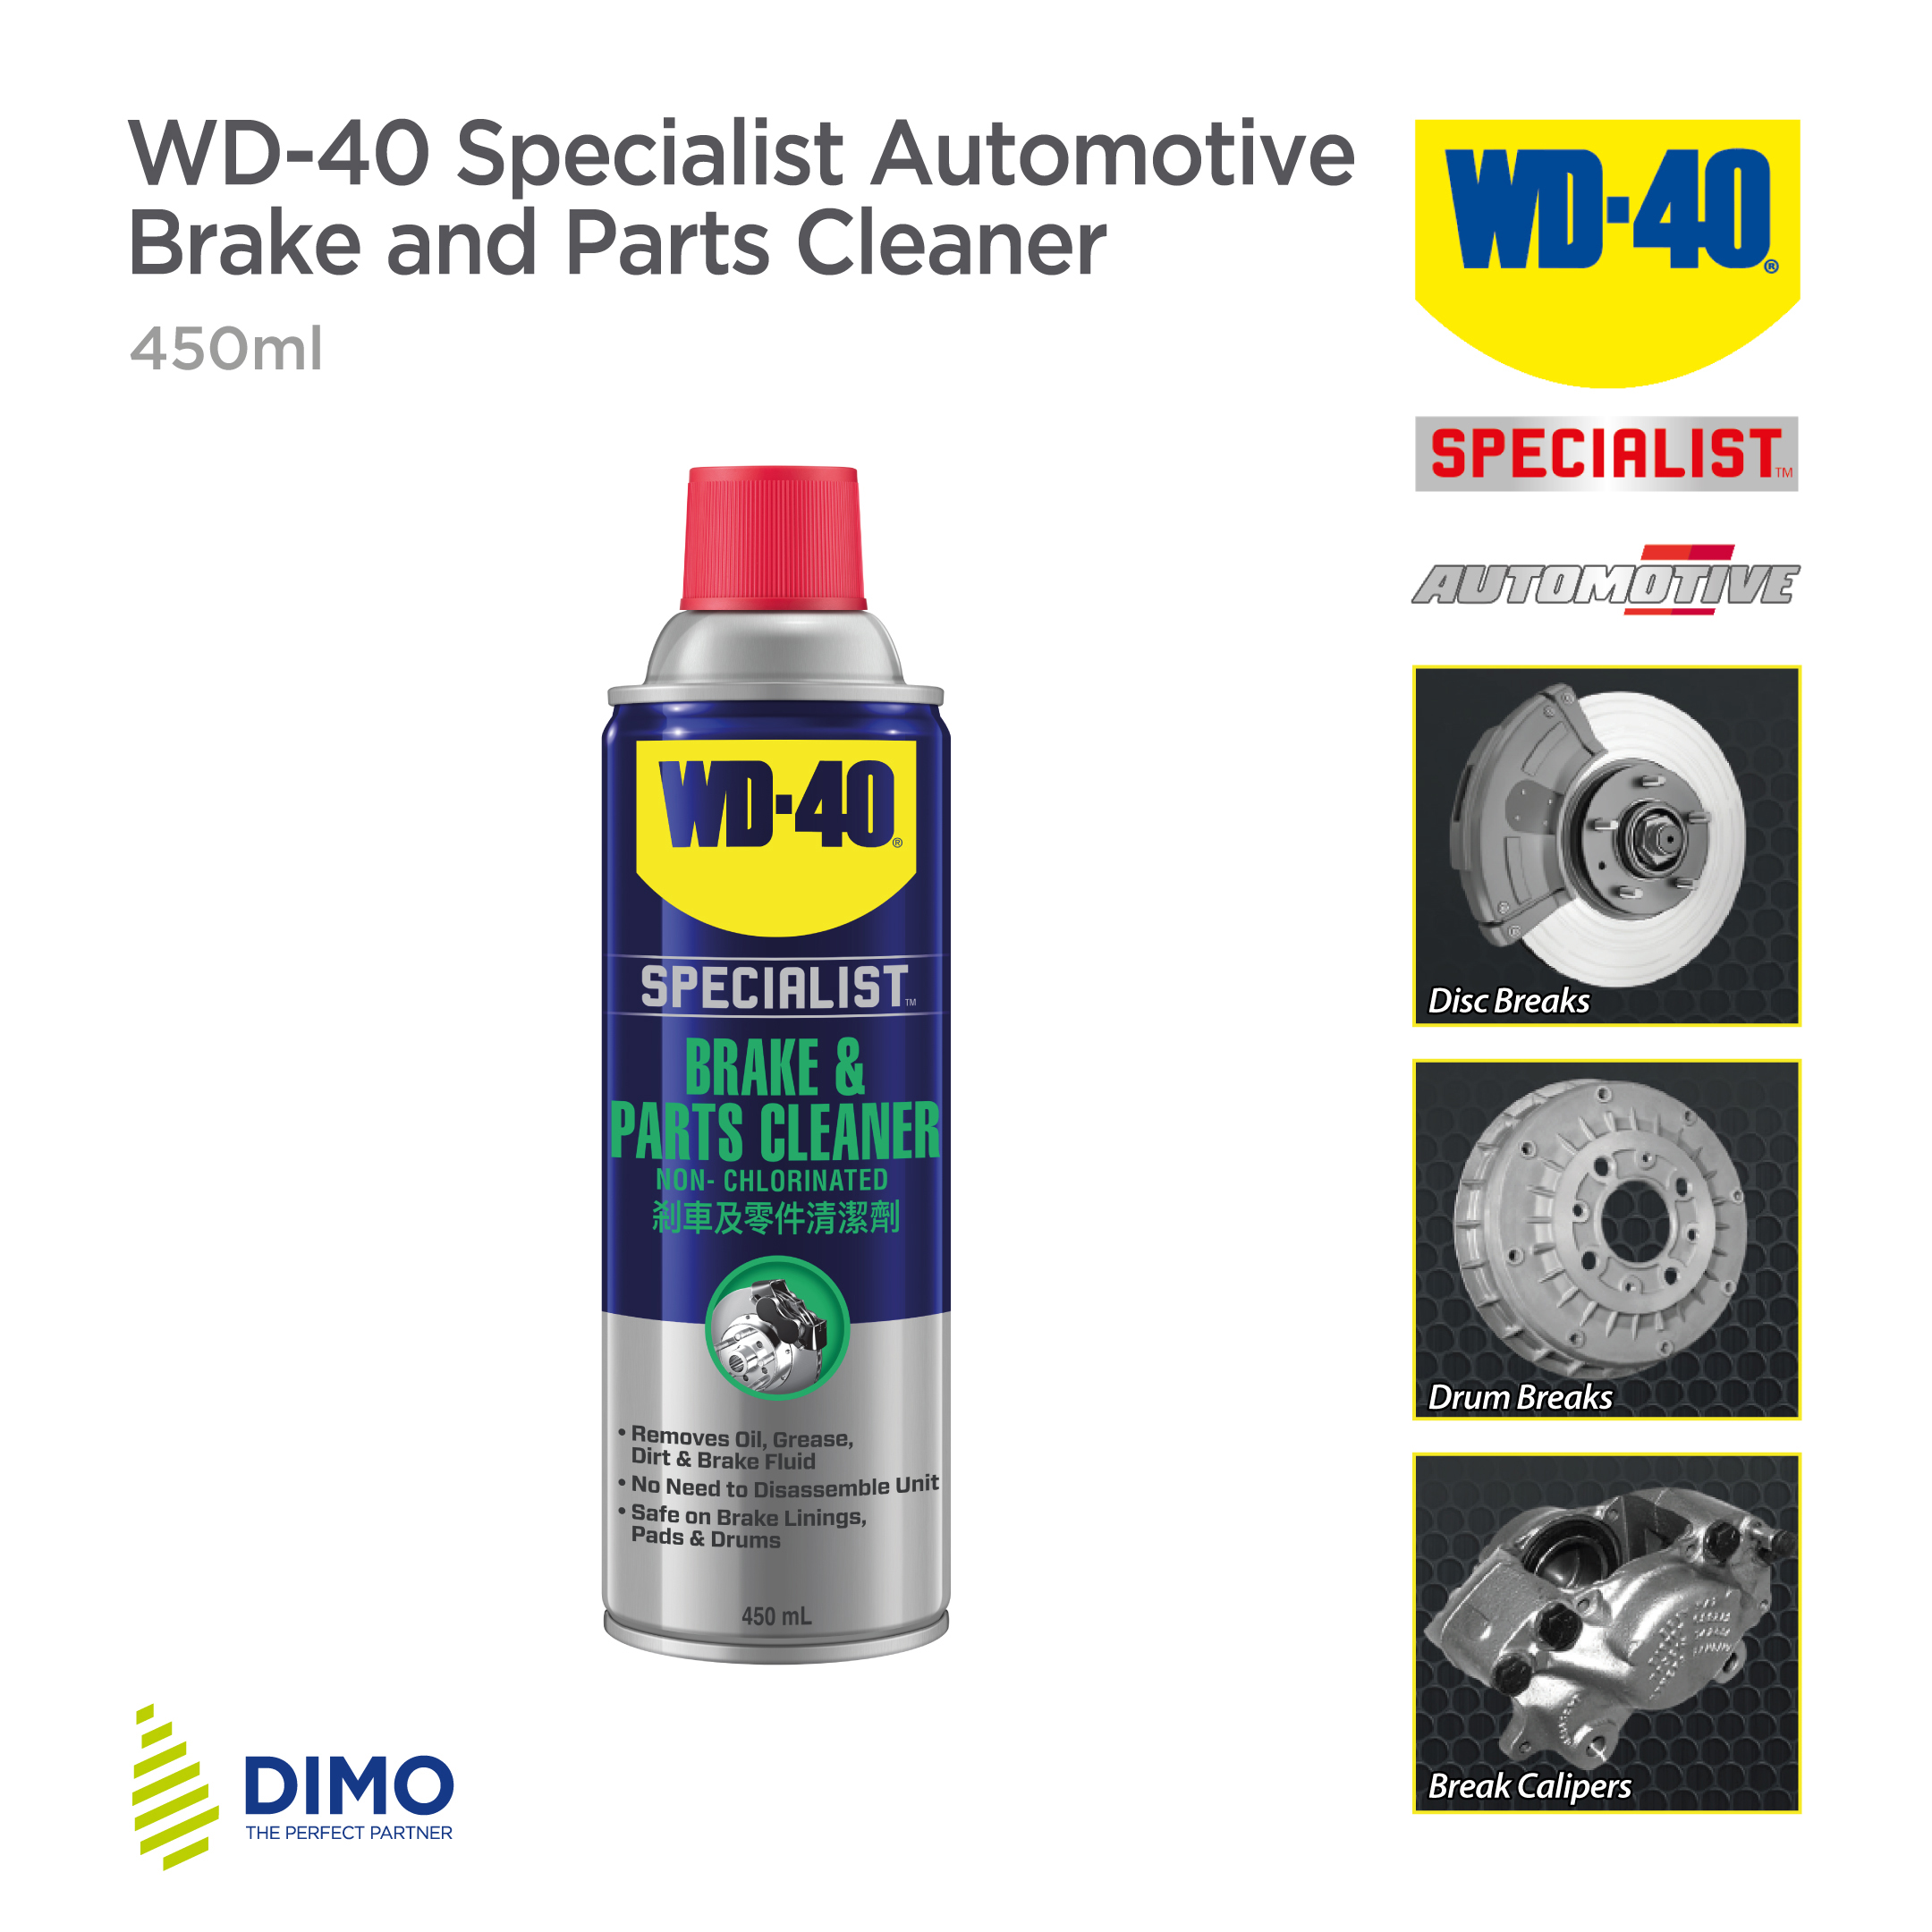 WD-40-Specialist-Automotive-Brake-and-Parts-Cleaner-450ml copy